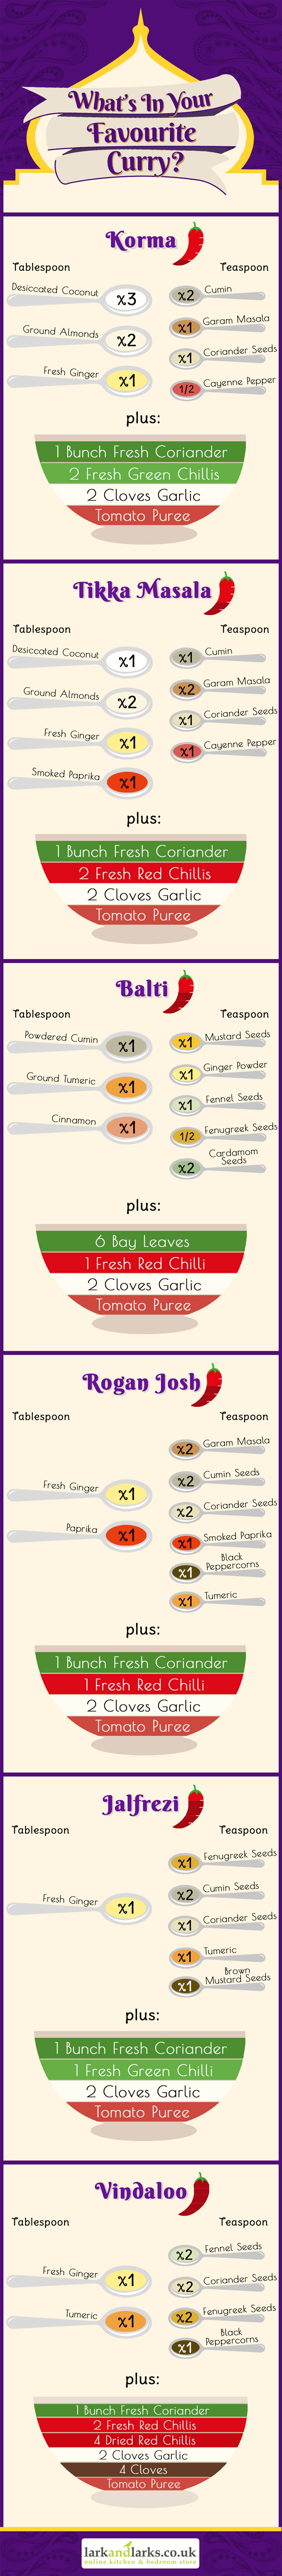 Lark and Larks - CurrySpices infographic